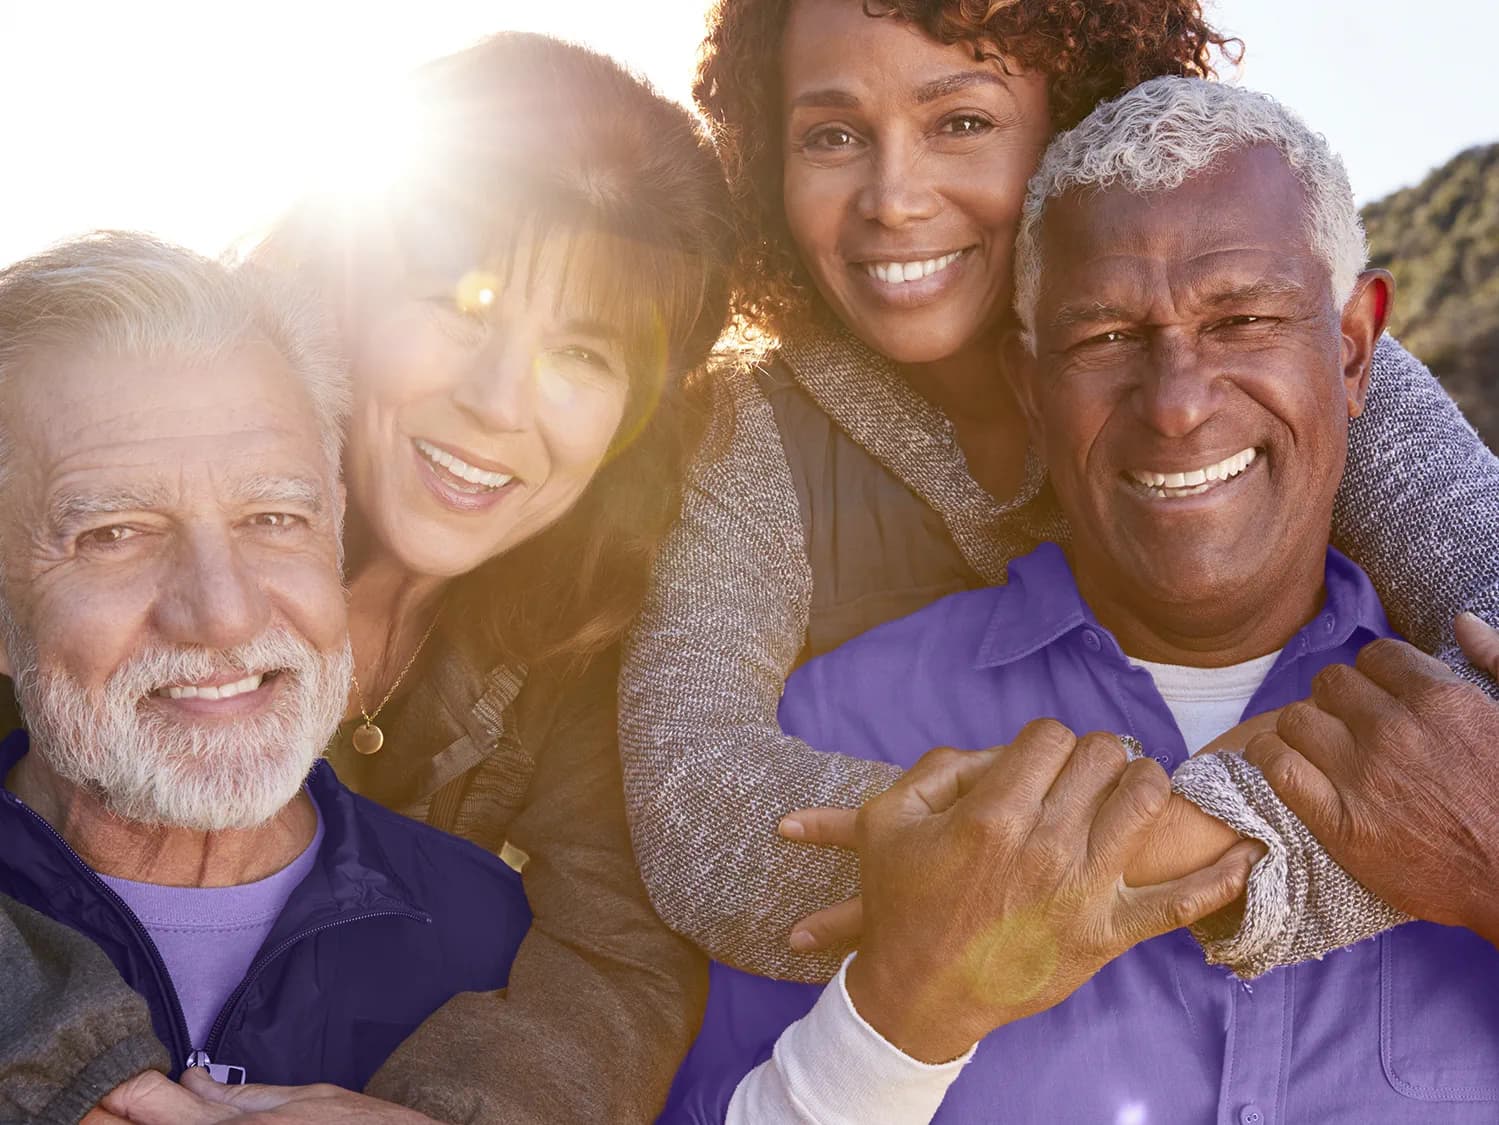 Enhance your travel experiences, fully engaged in conversations and laughter with friends, knowing that every destination is enriched by the use of hearing aids.